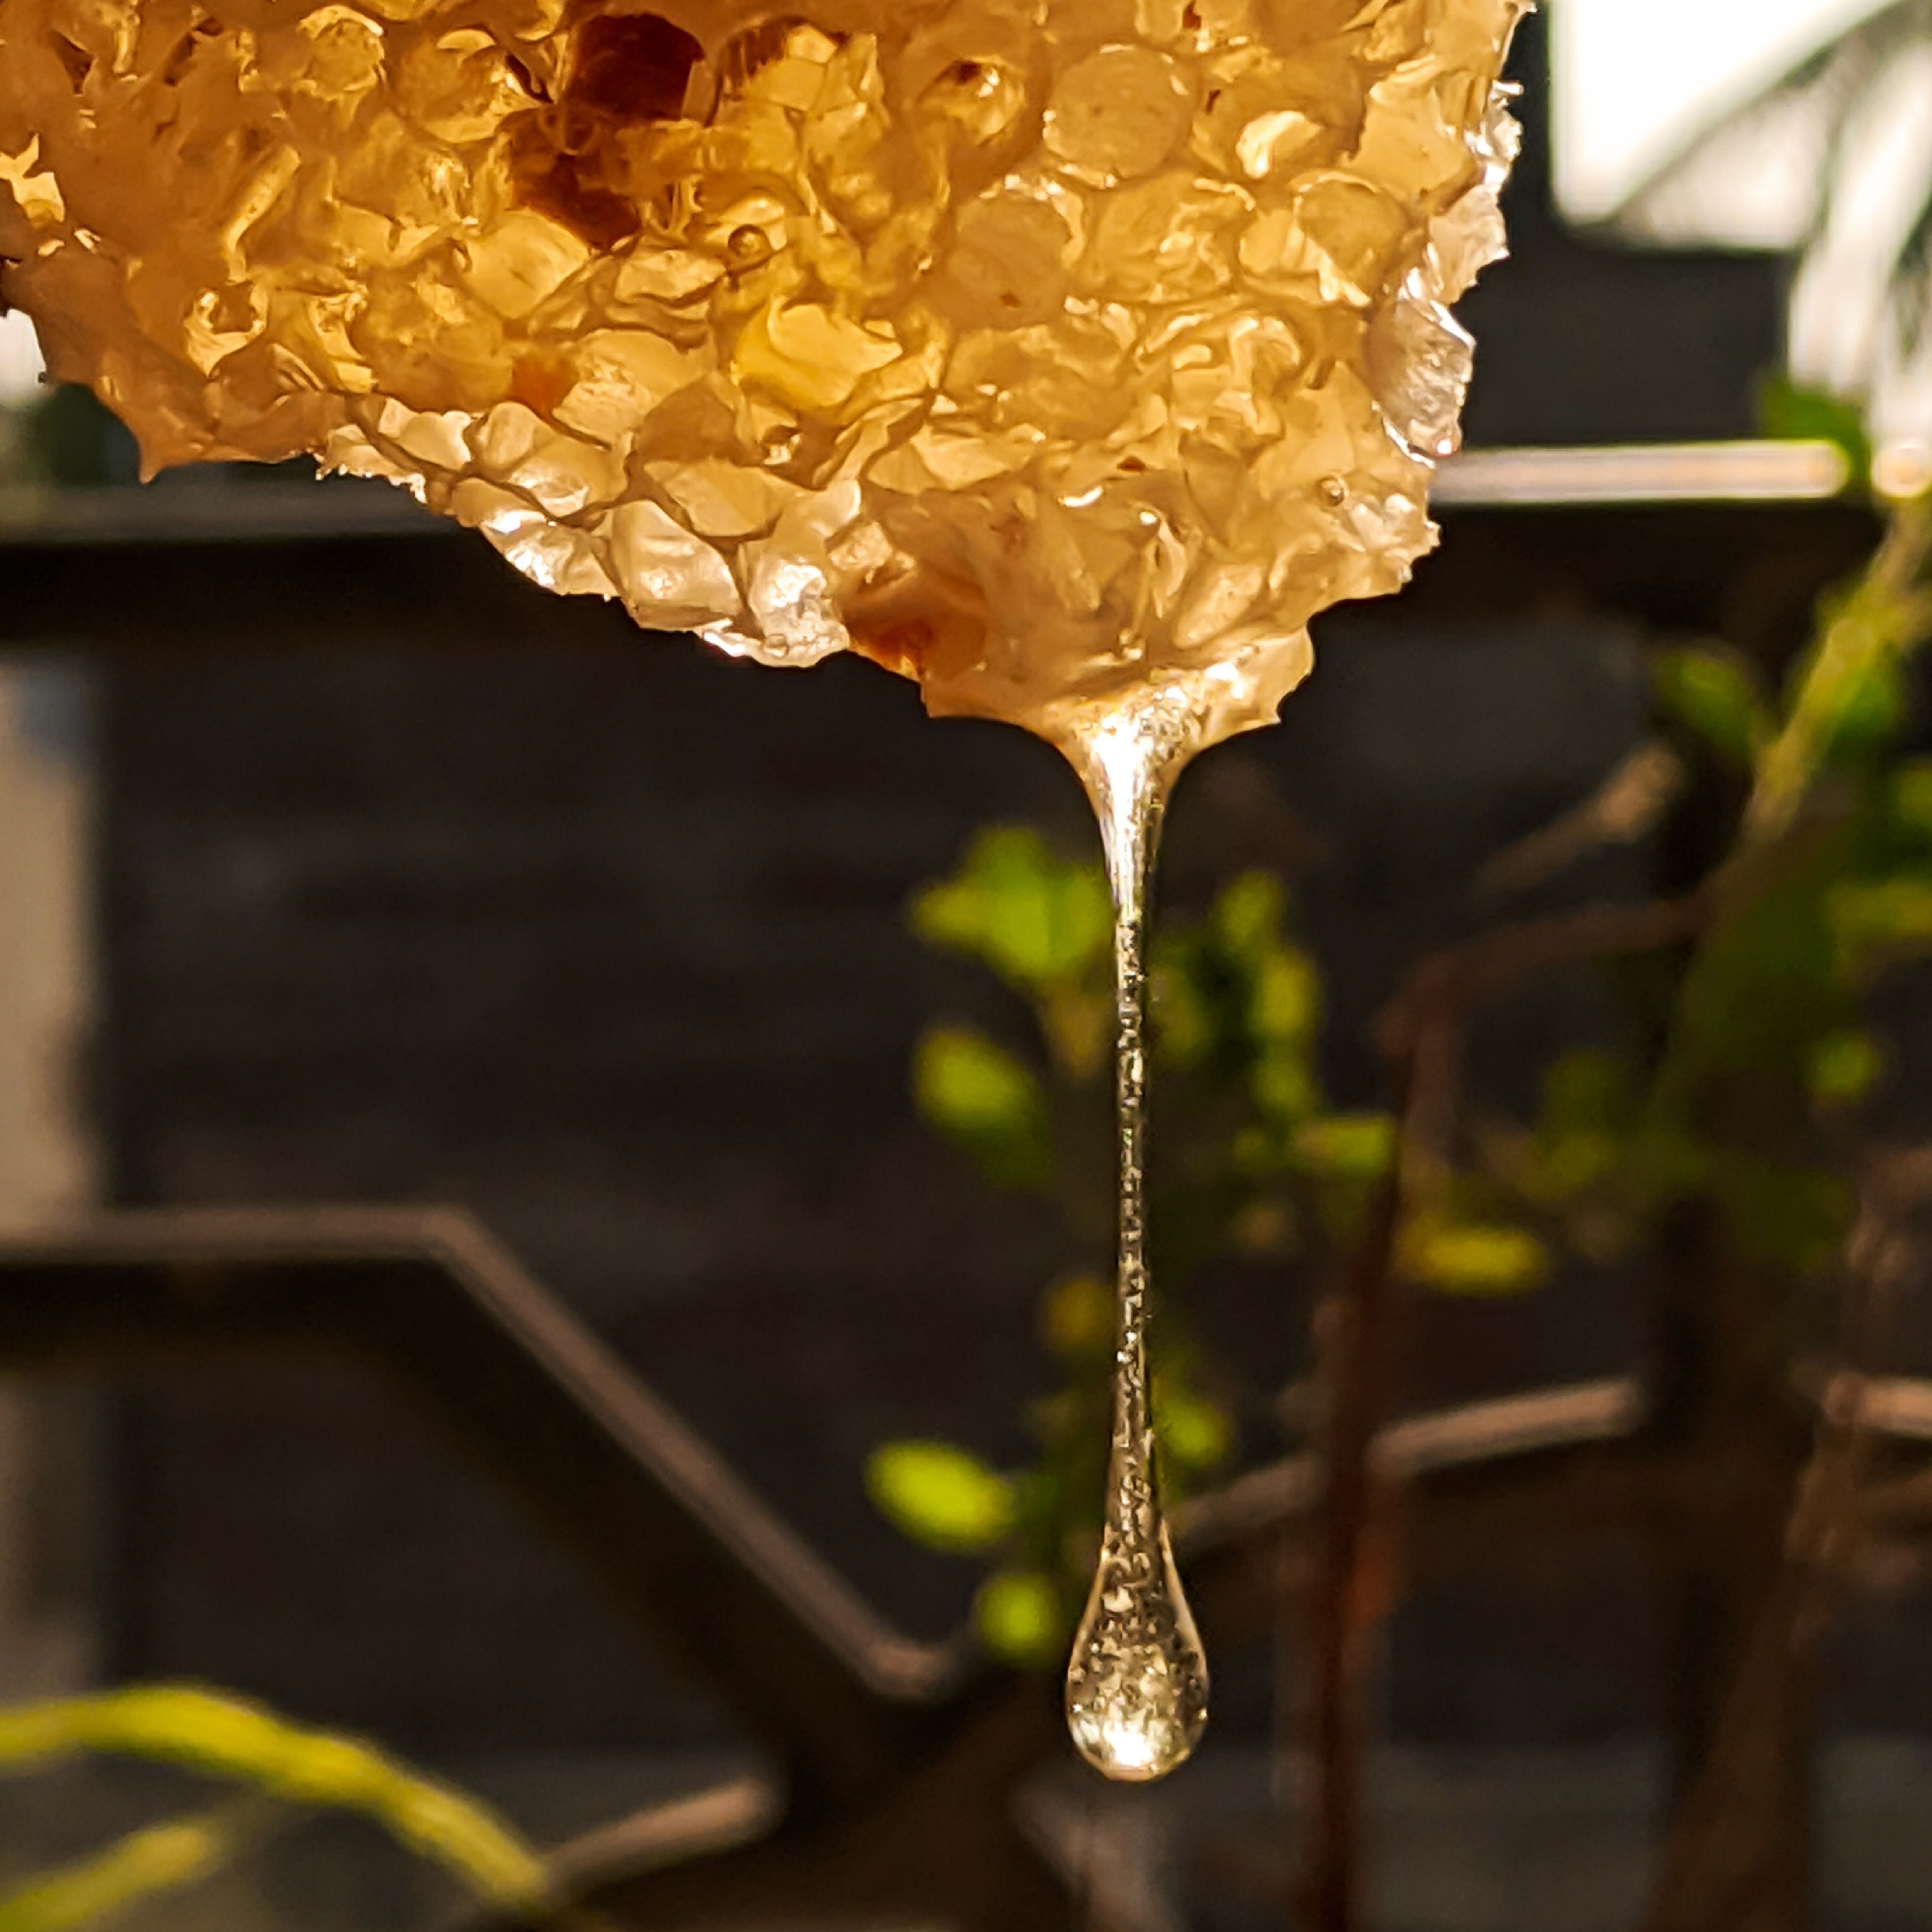 honey comb dripping with honey from a frame